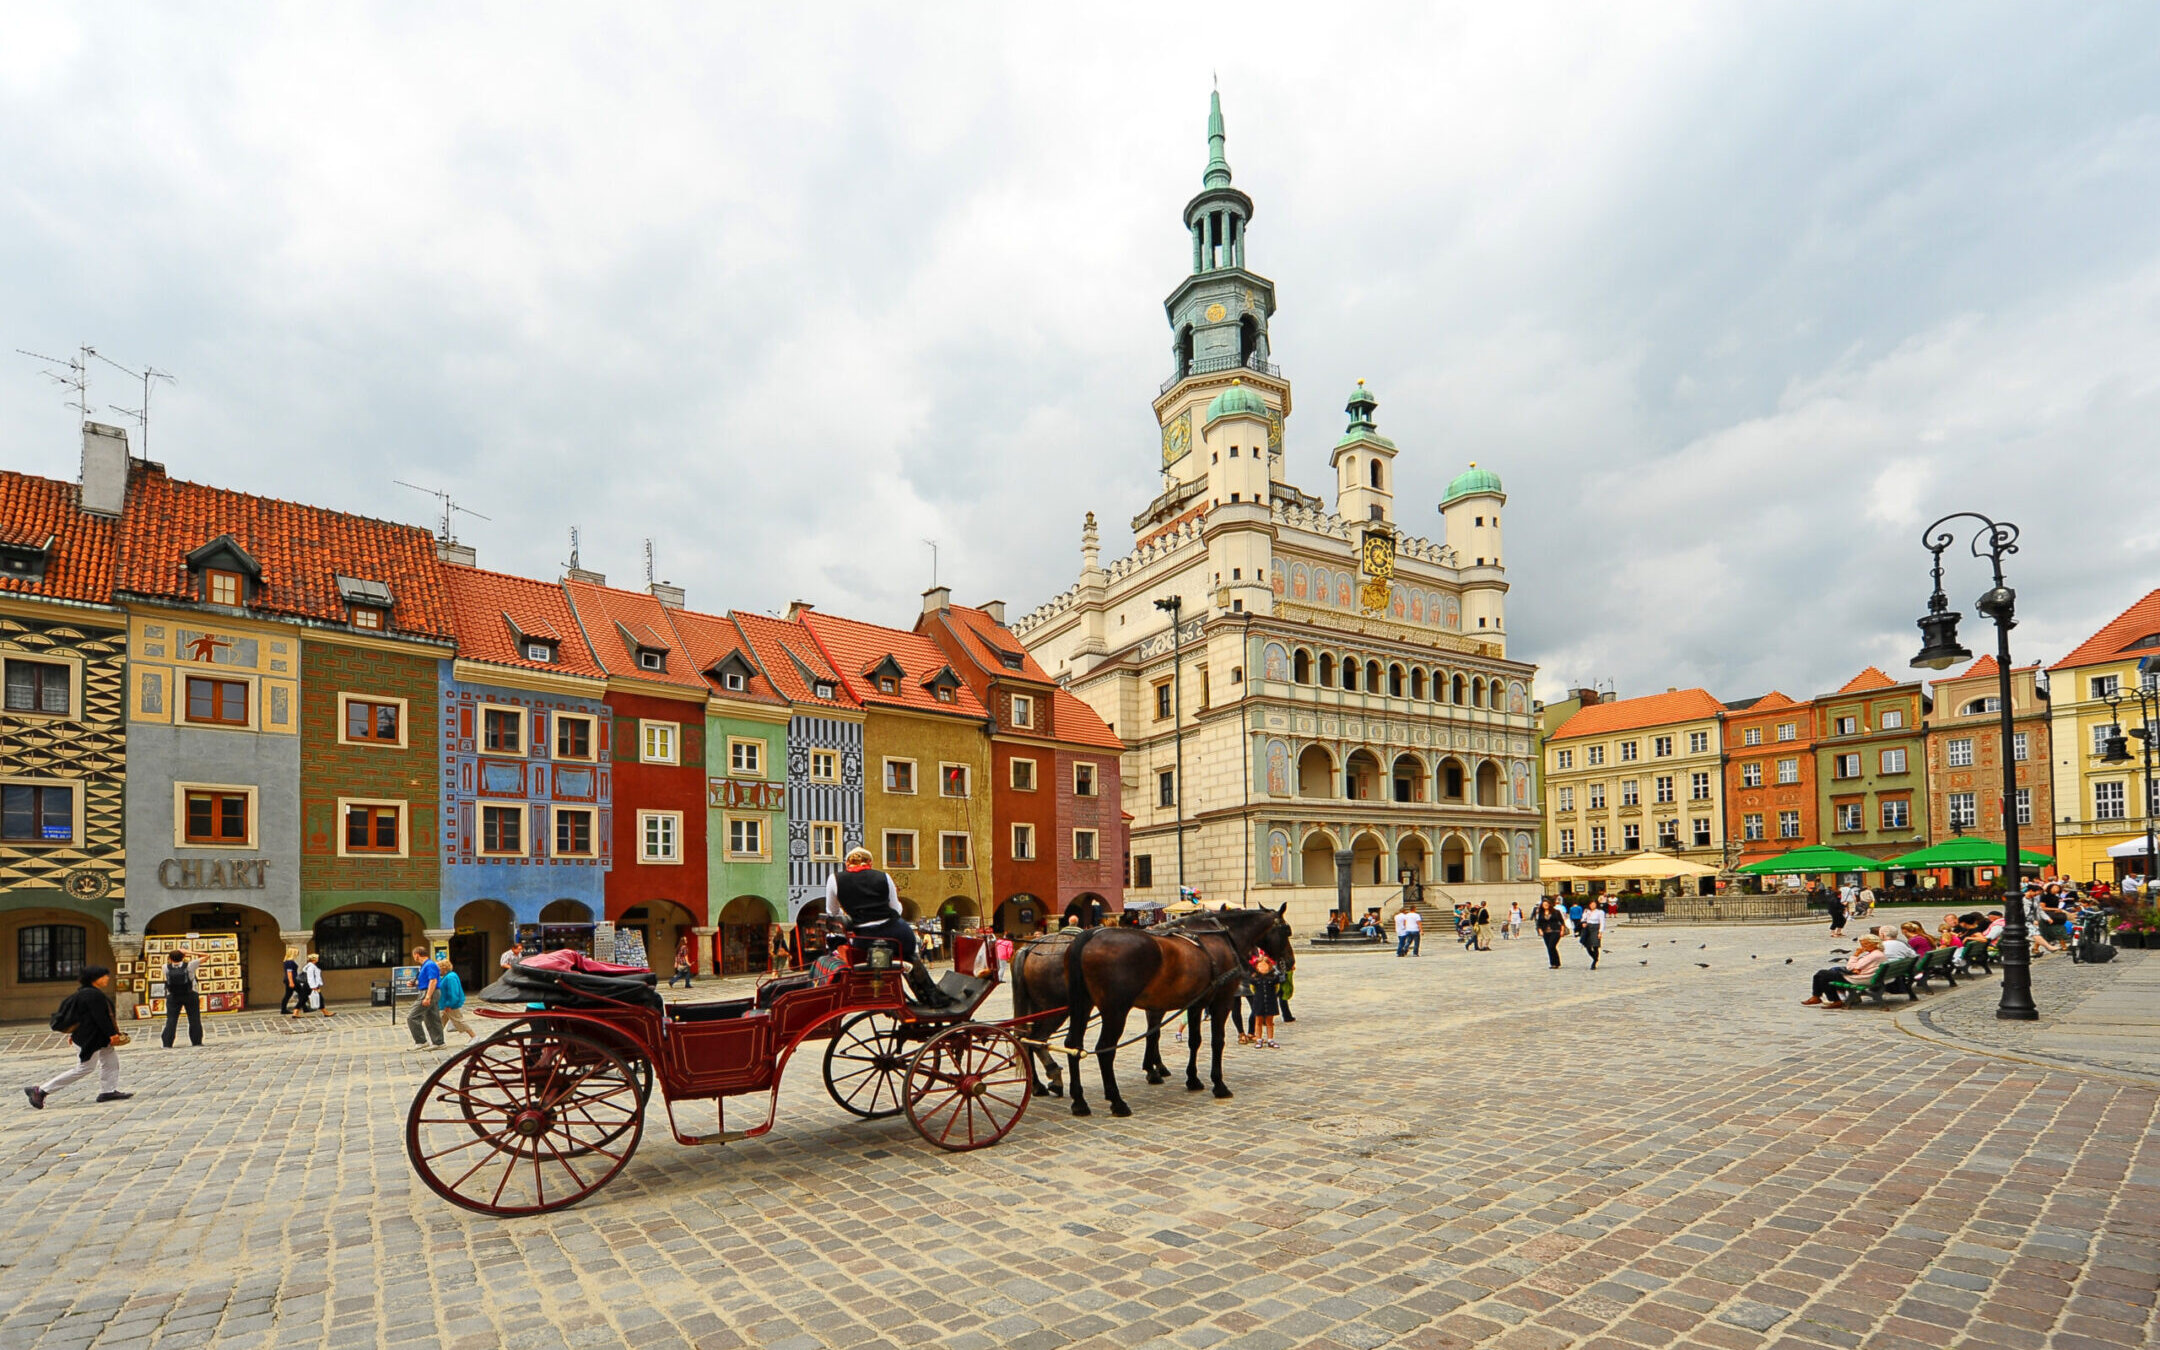 Poznan is Poland’s fifth-largest city and one of its oldest. Its historic city hall is seen here. (Getty Images)